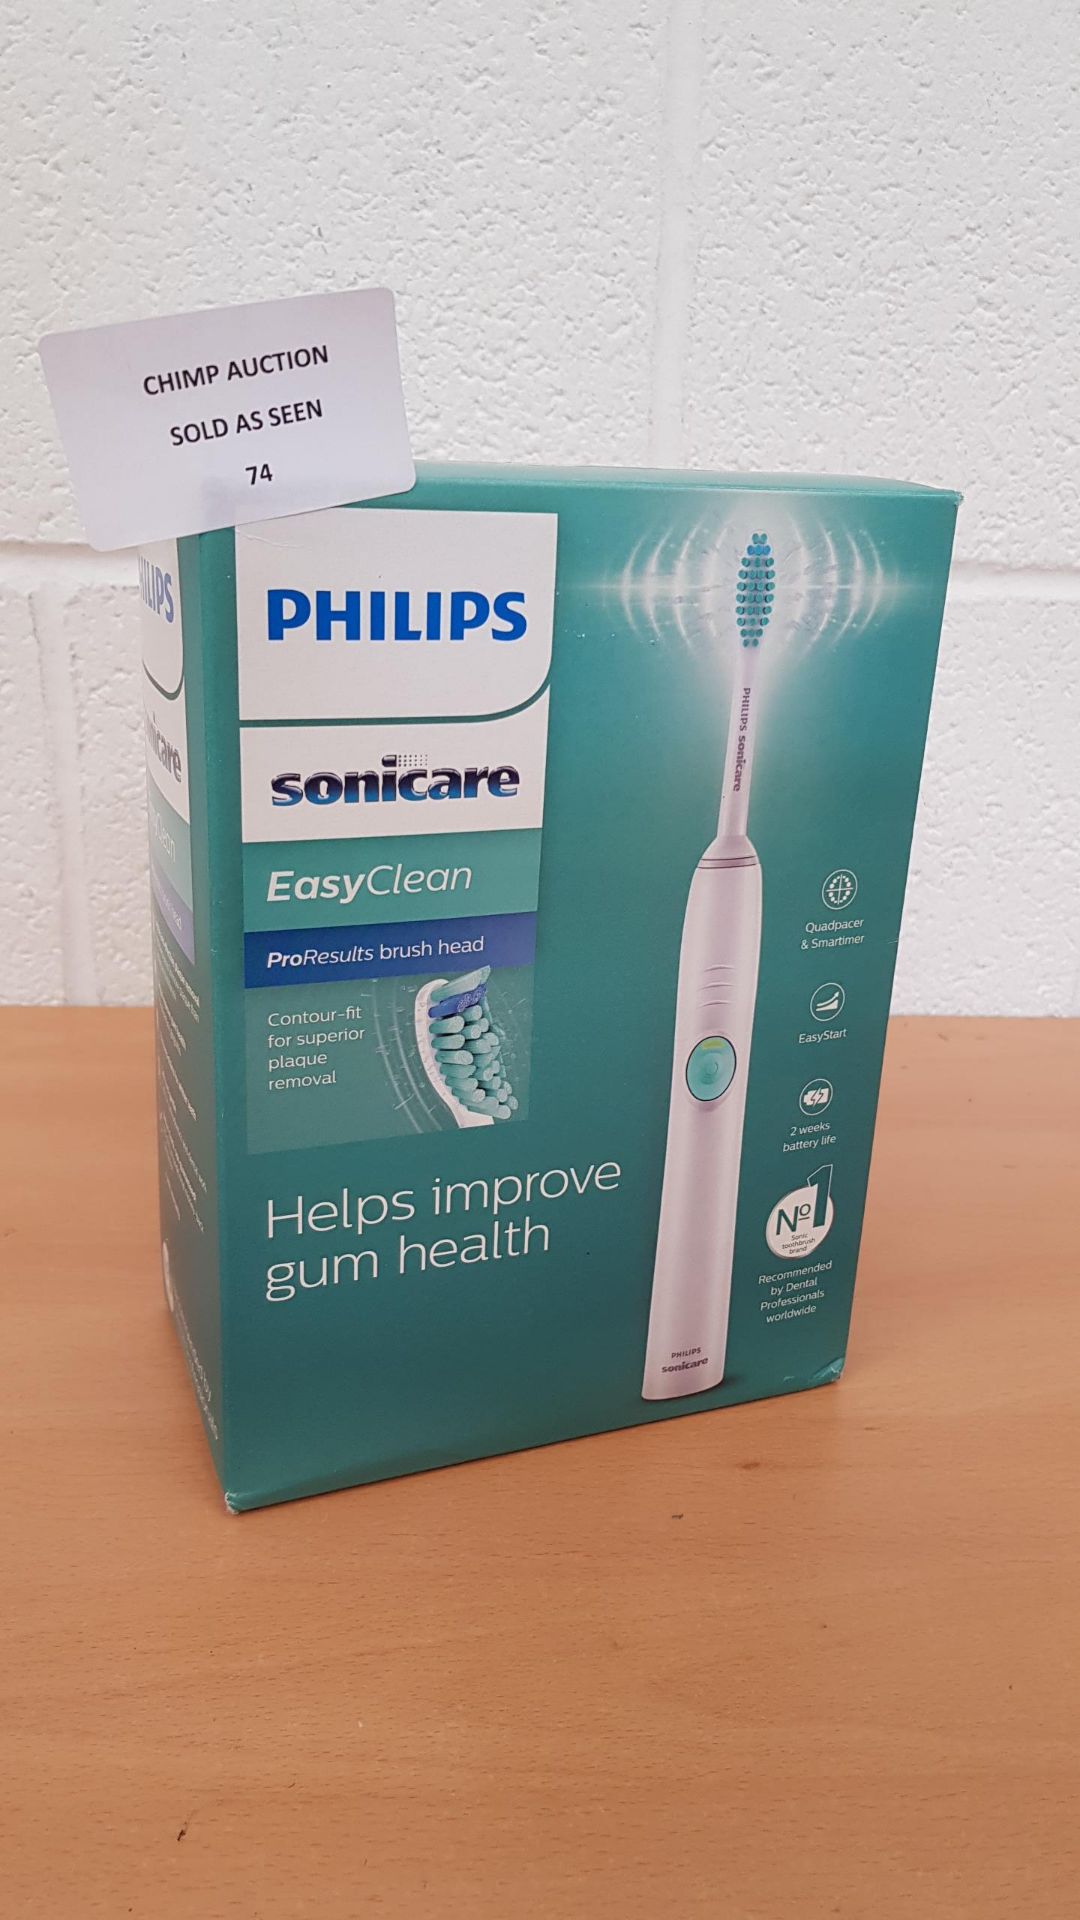 Philips Sonicare EasyClean Electric Toothbrush- HX6511/50 RRP £89.99.